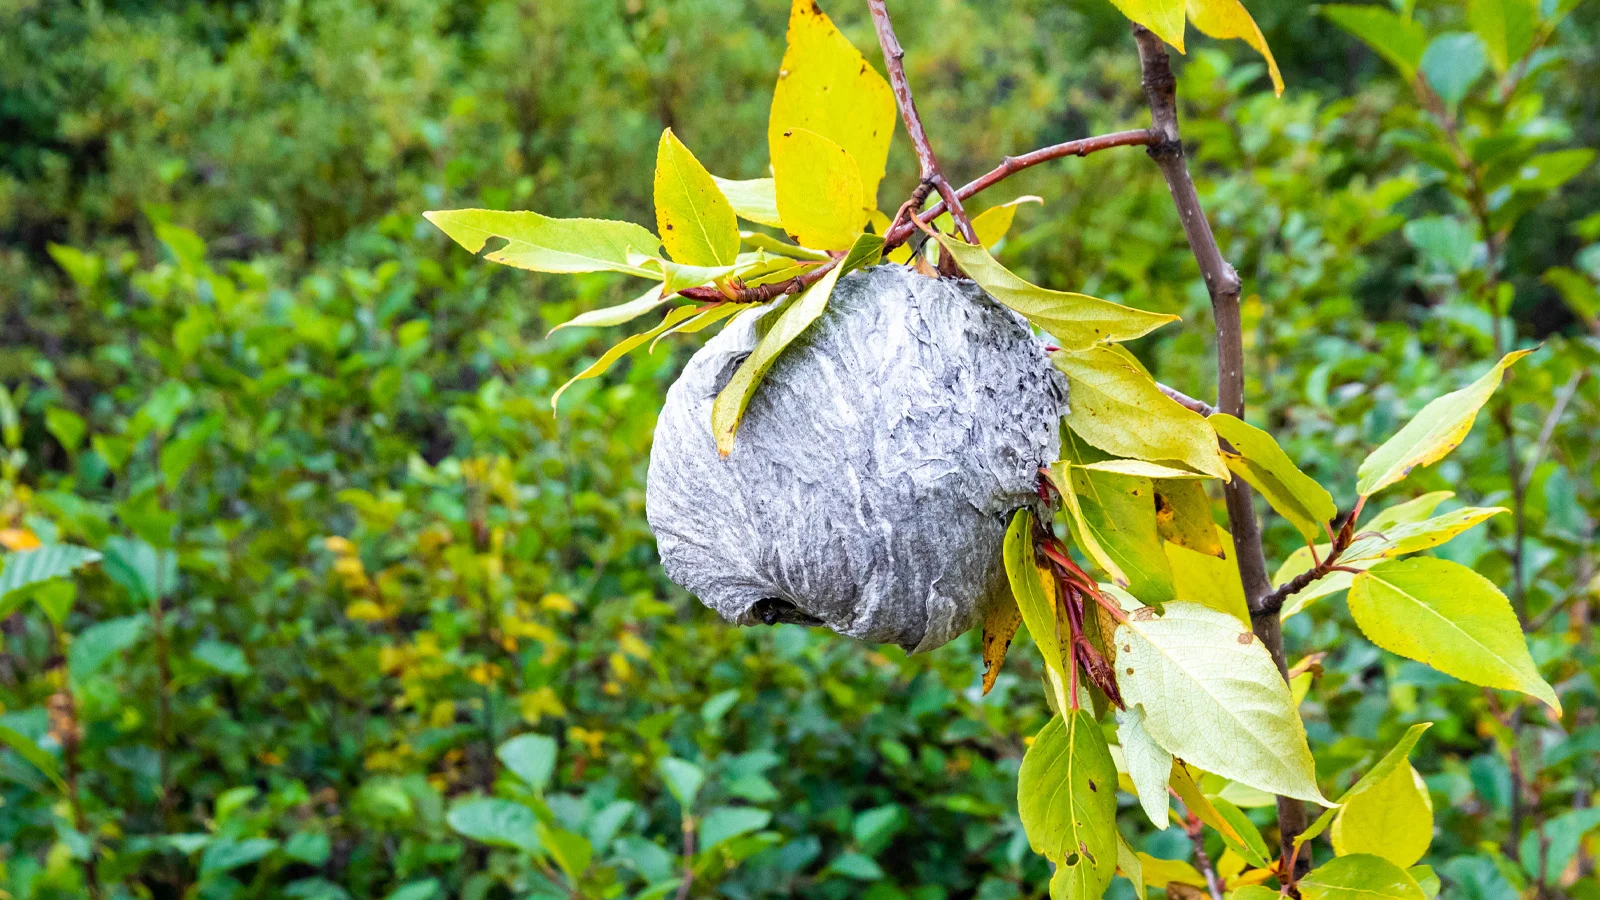 A wasp nest